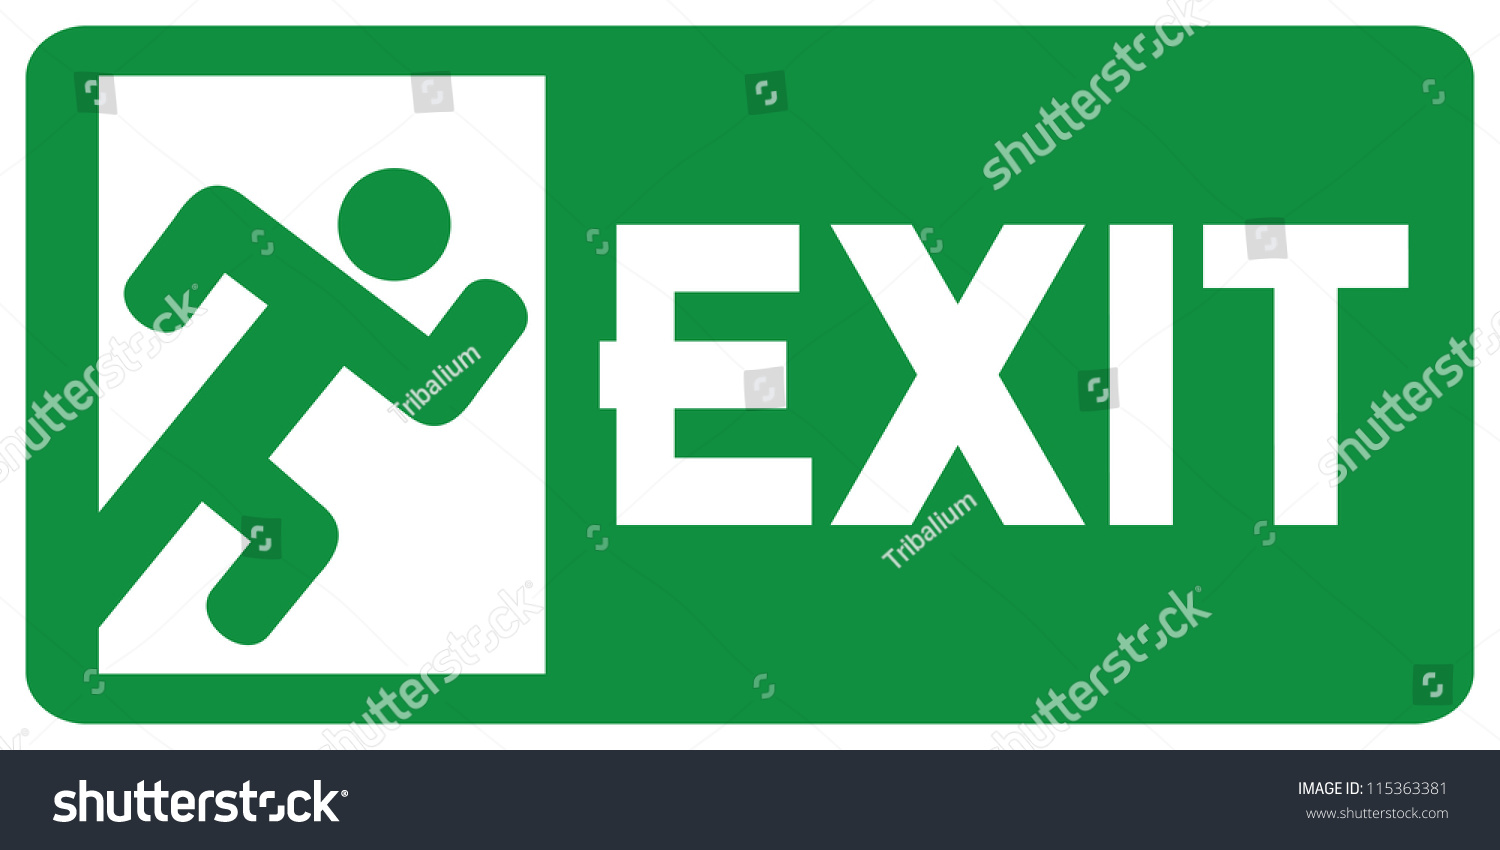 Green Exit Emergency Sign Stock Photo 115363381 : Shutterstock